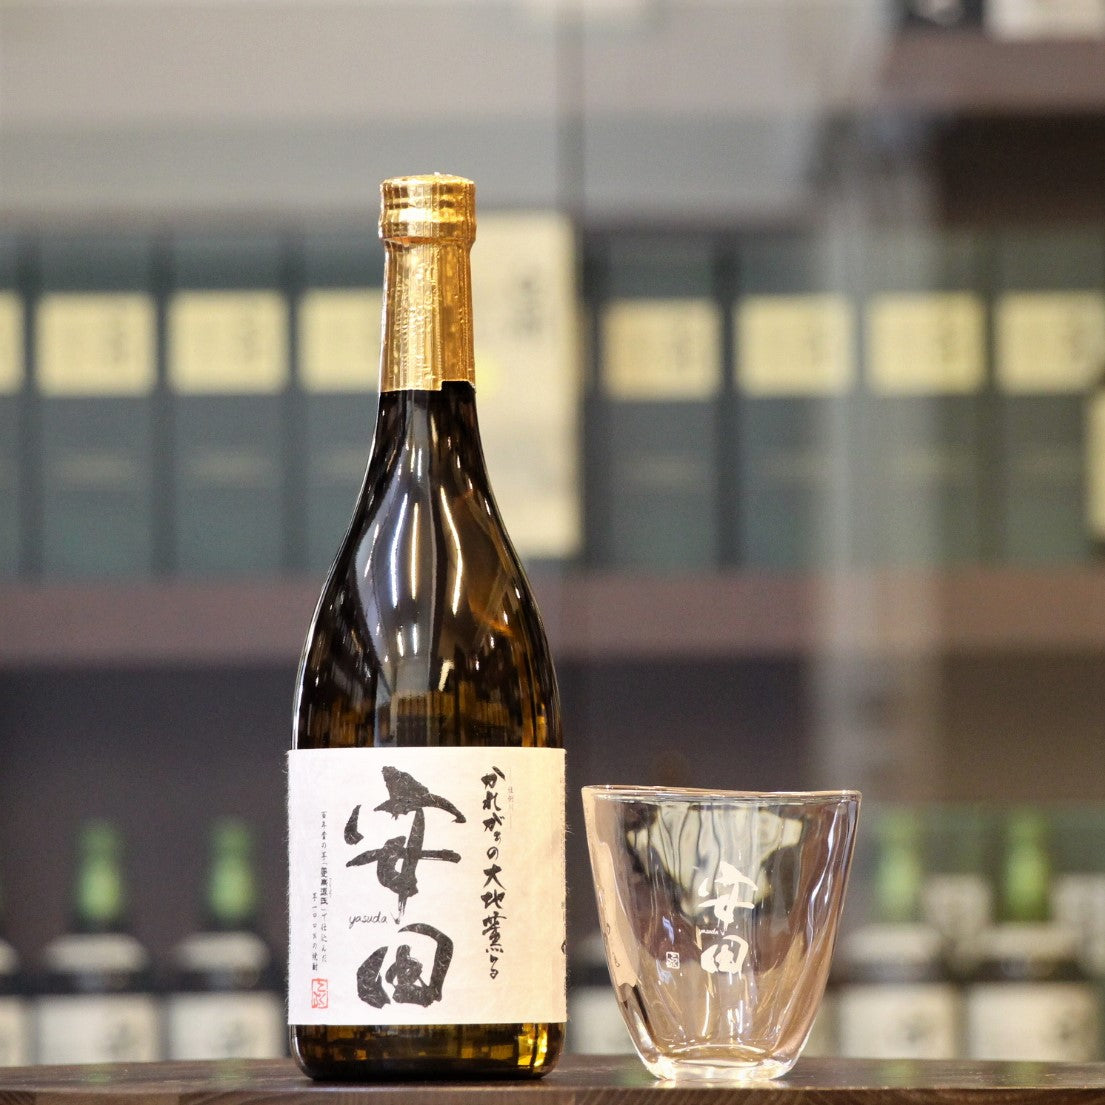 This unique and fruity Shochu named after their Toji/Master Distiller – Mr. Nobuhisa Yasuda was first released in 2013. Using sweet potato (Imo) as the main ingrredient and Imo Koji from Tsurunashigenji to make a 100% Imo Shochu that is more aromatic and fruity. This limited offer set comes with a beautiful Yasuda Shochu Rock Glass which are great for experiencing the aromas and flavours of these 2 brilliant whiskies. Please note that the glasses do not come with any box or lid.